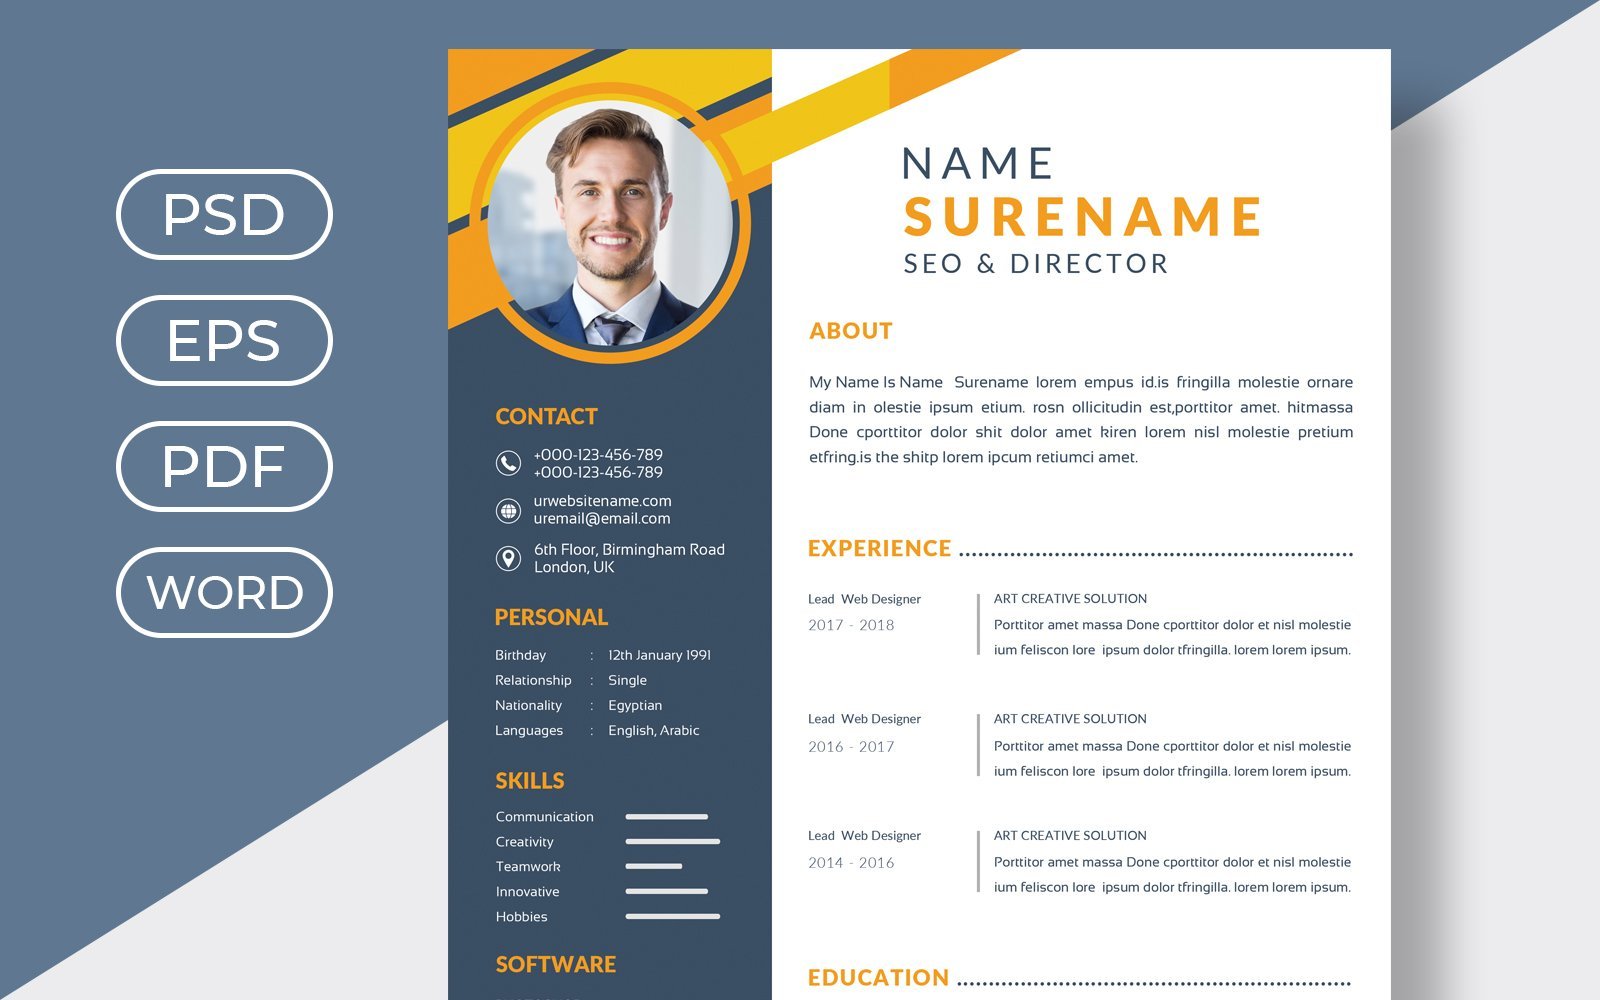 Template #318094 Resume Resume Webdesign Template - Logo template Preview